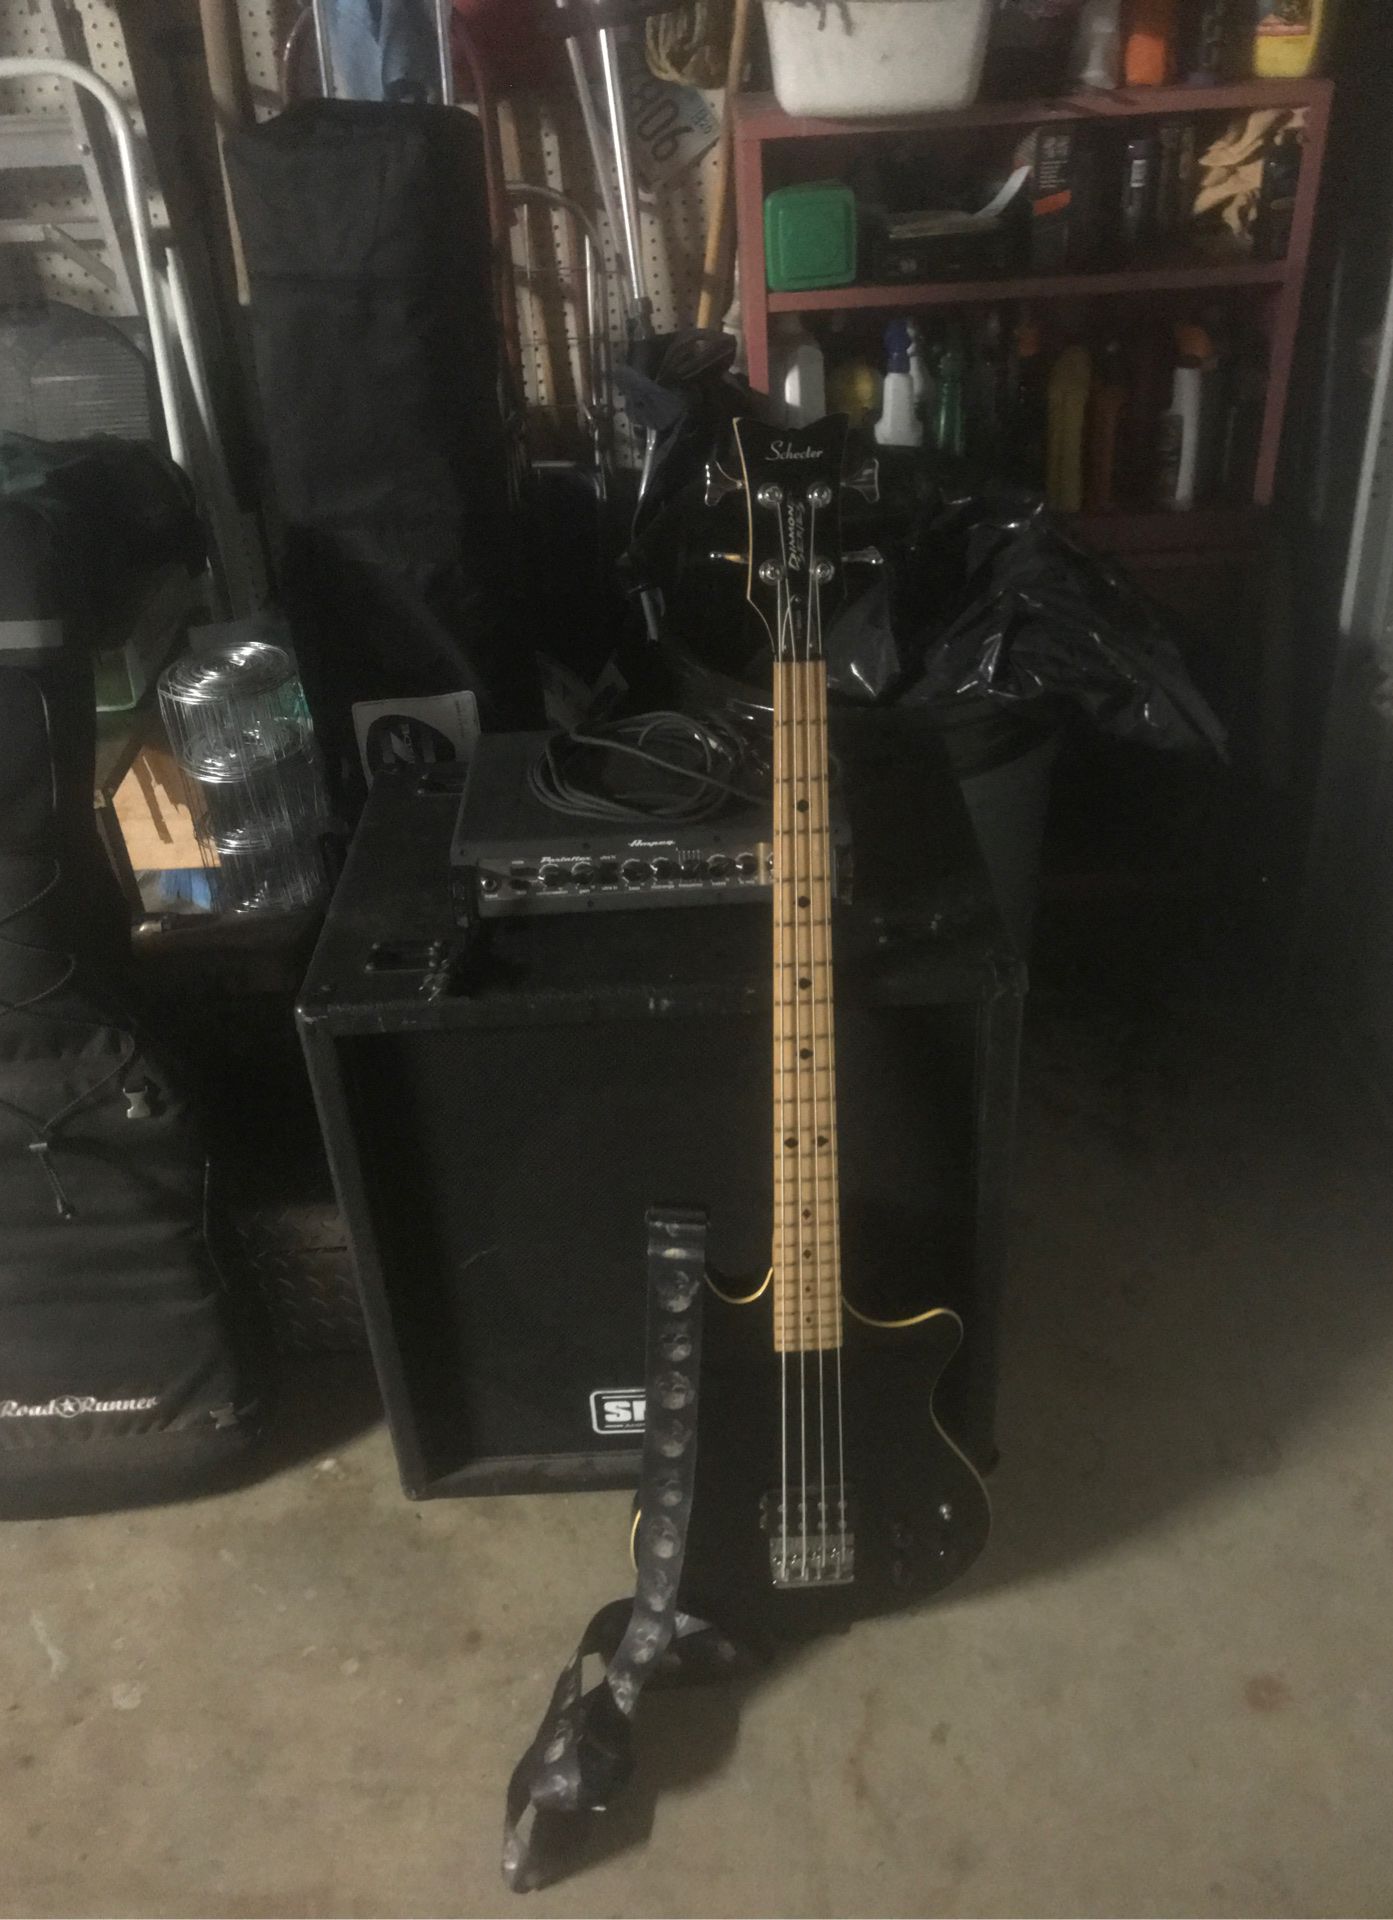 Schecter bass and Ampeg amp